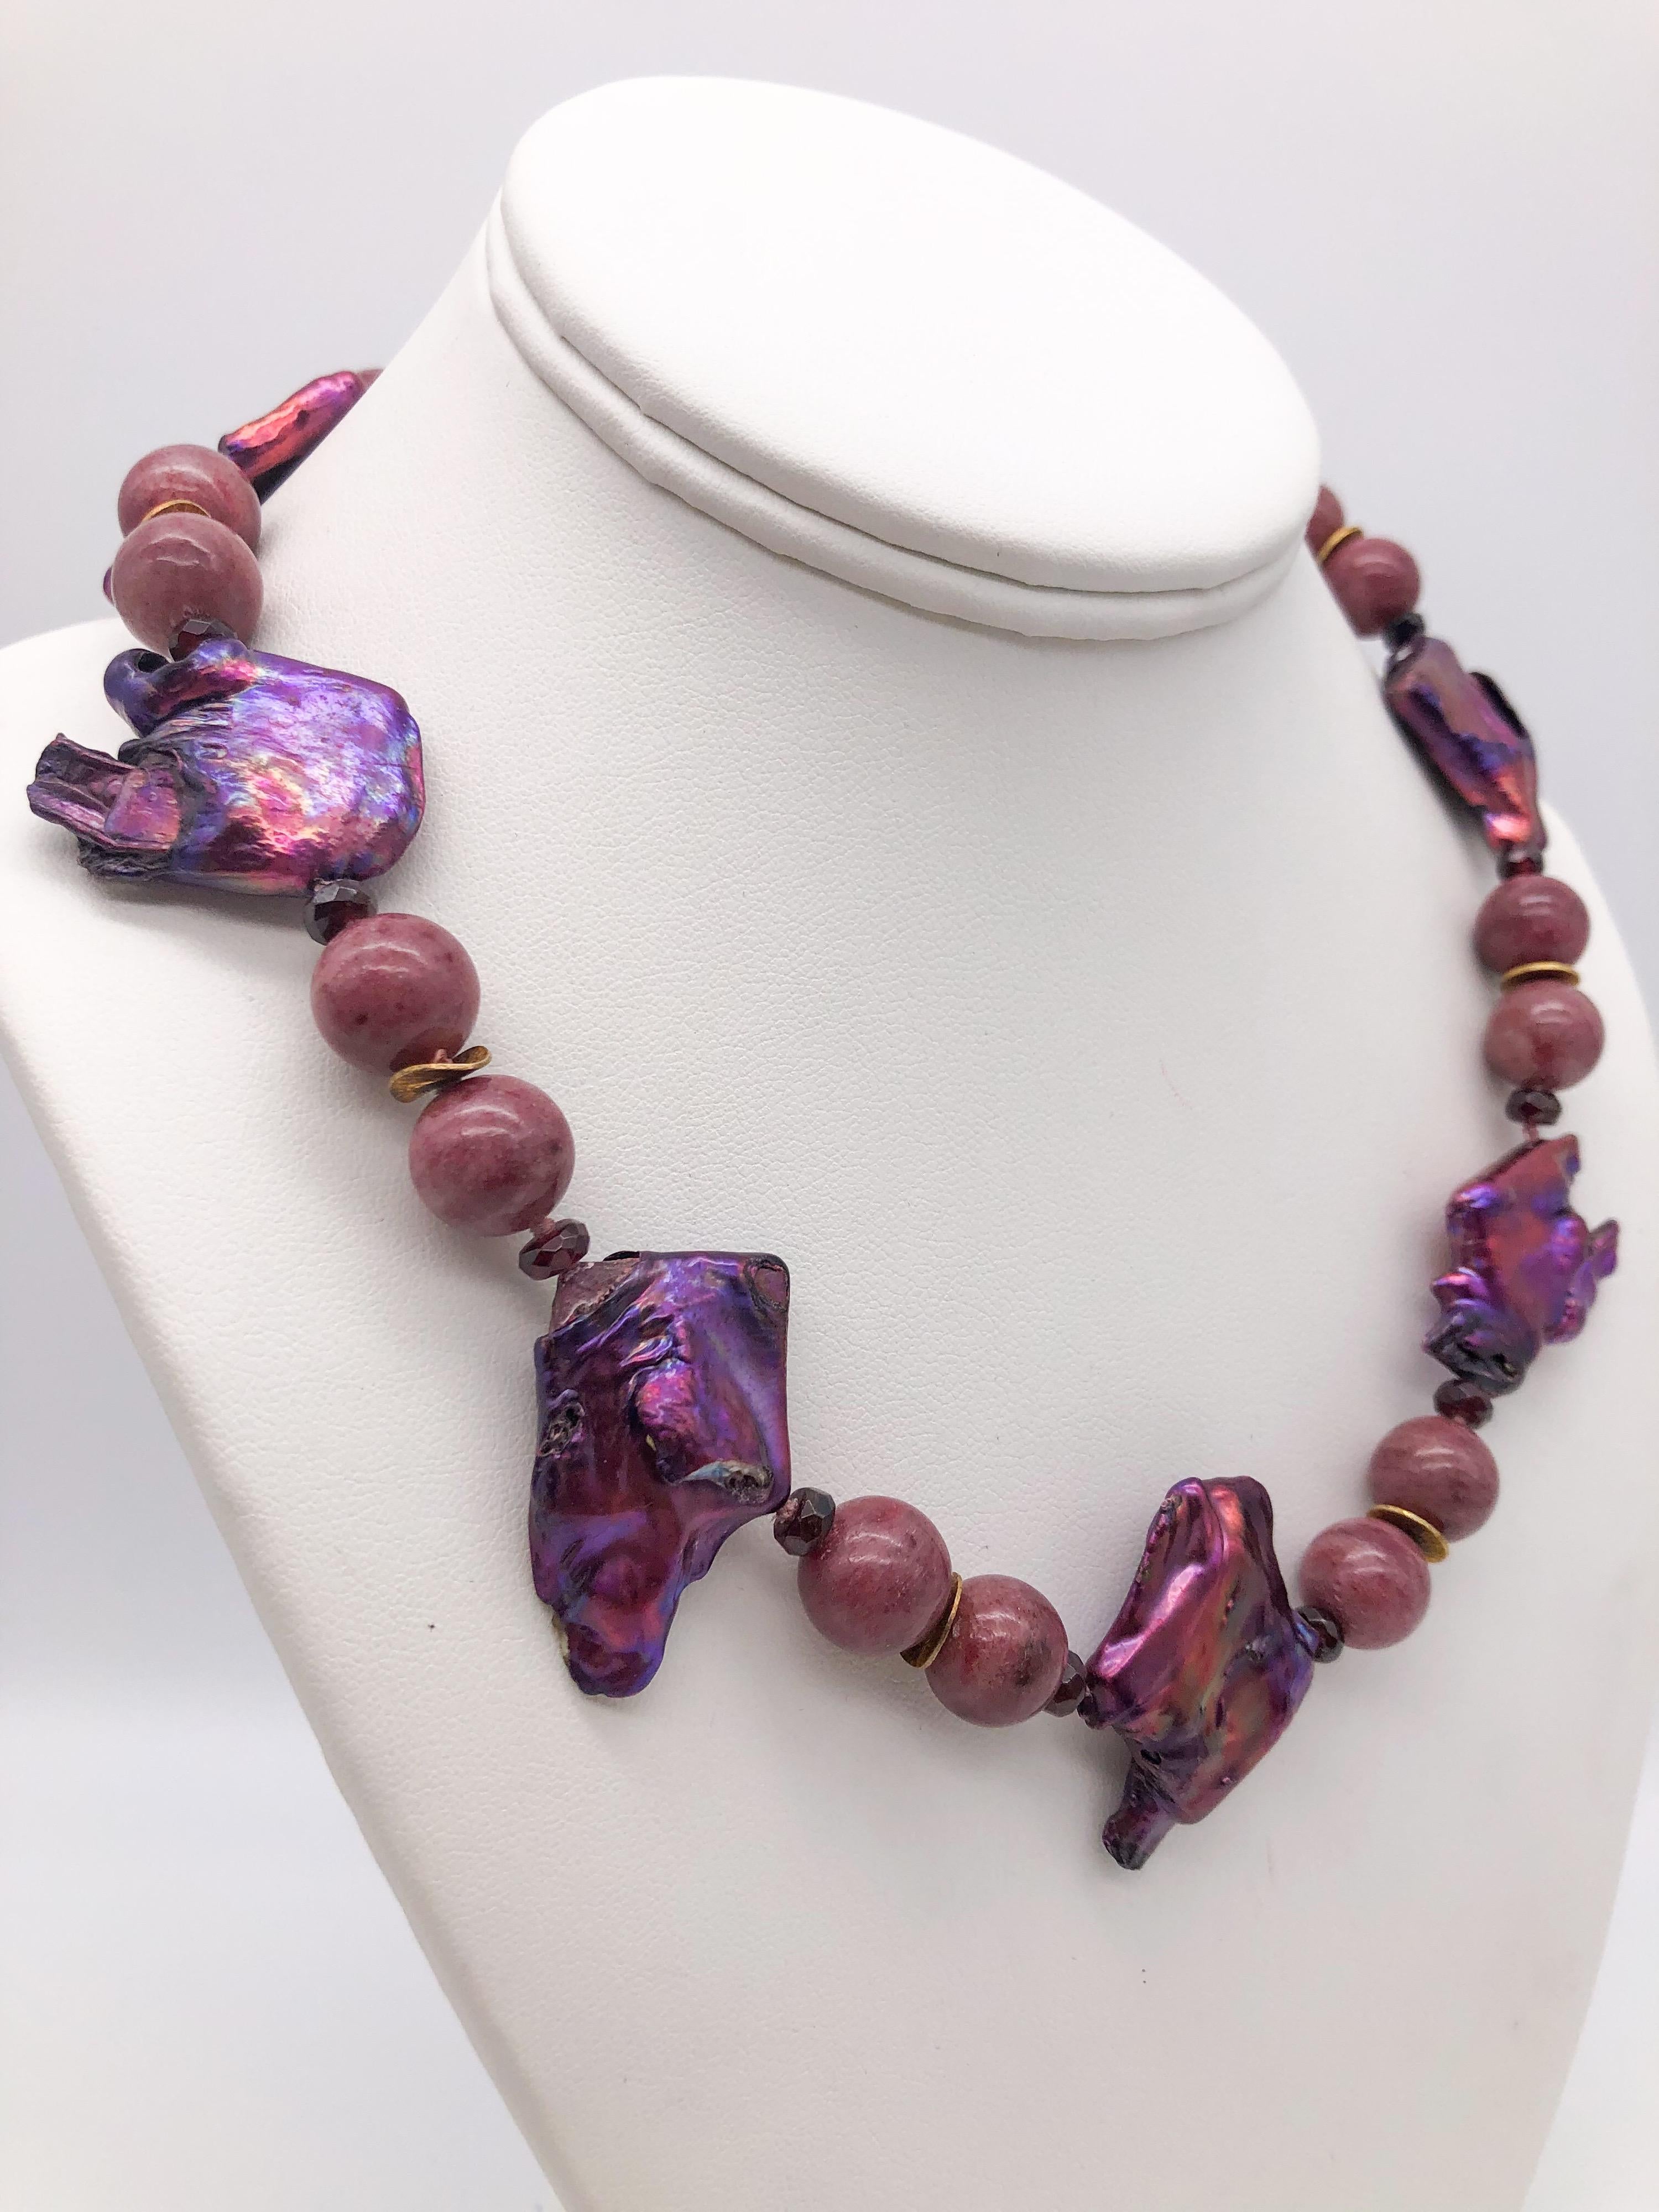 One-of-a-Kind
A study in magenta. These unusually large and deep-hued pearls with other beads in the same range of colors, both zoisite, and garnet, make a highly attractive one-of-a-kind presentation. The clasp is a traditional Navaratna. The 9 gem